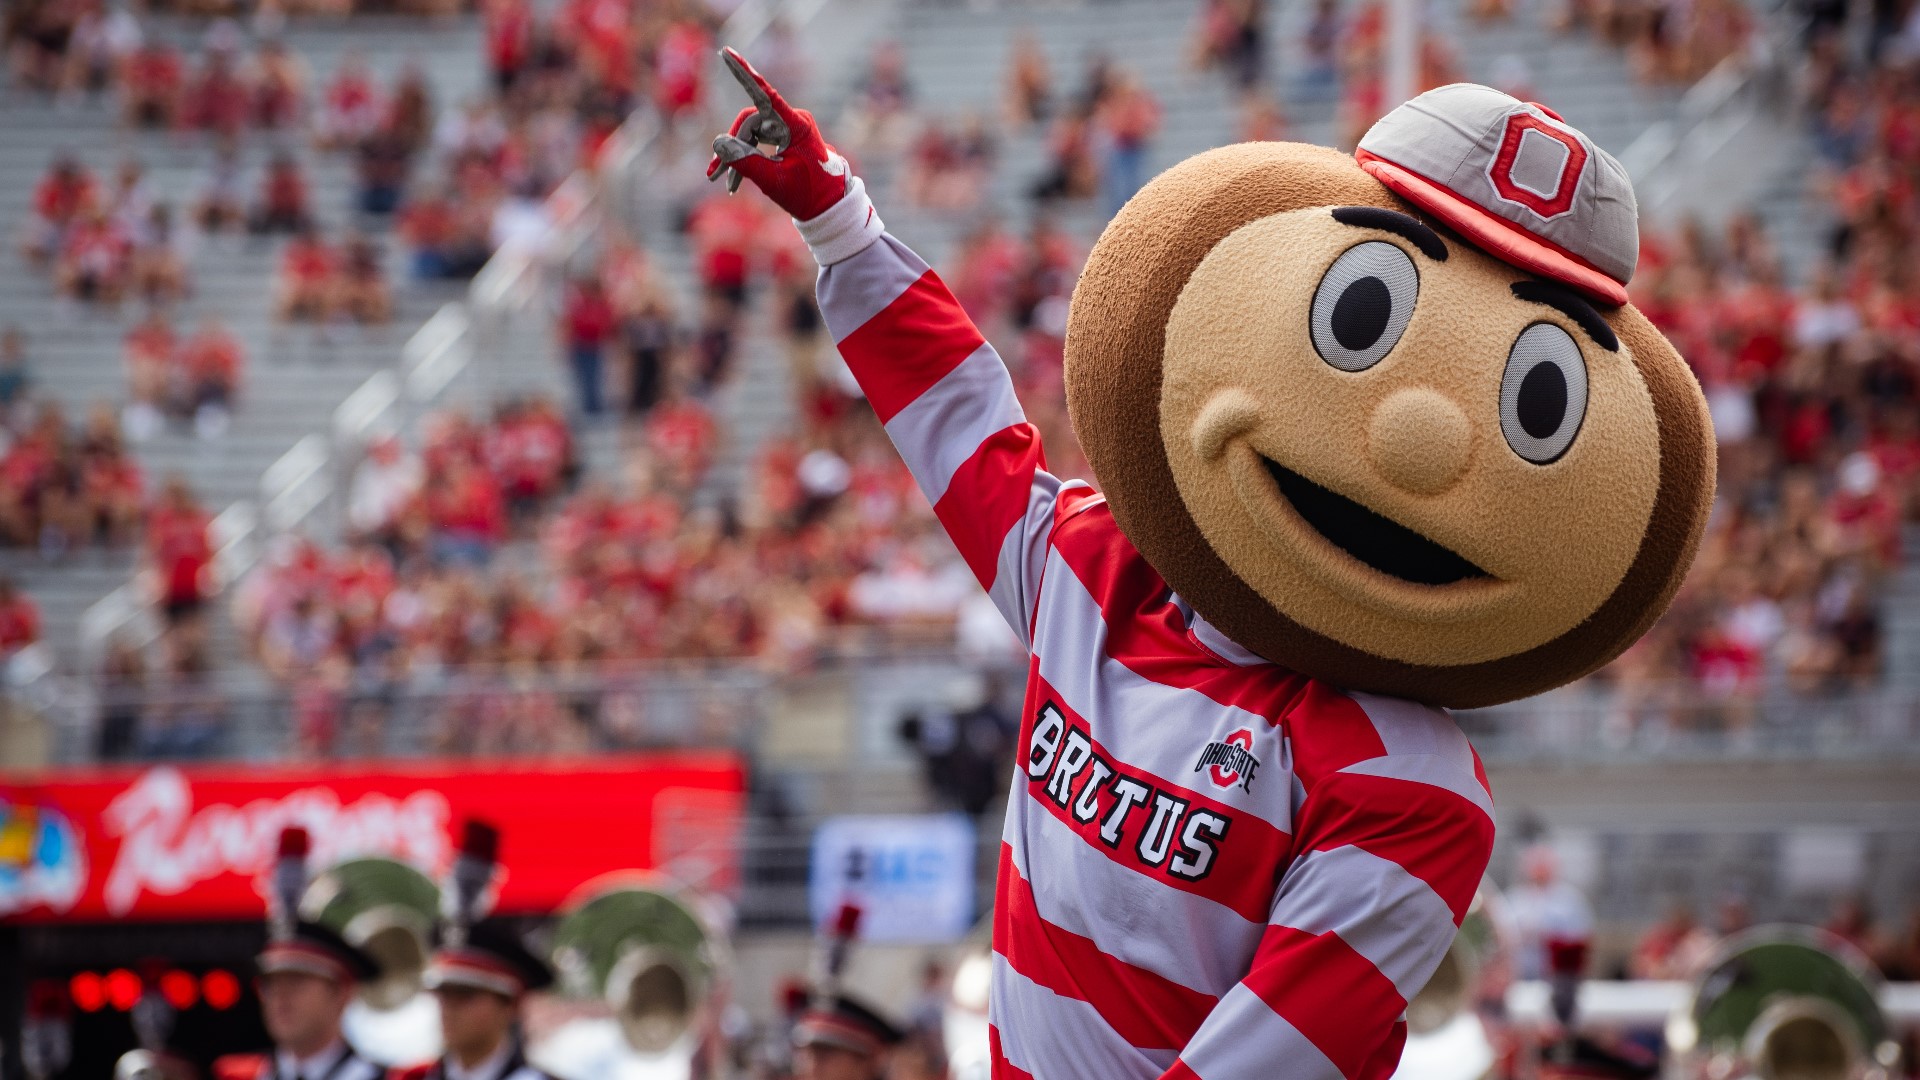 Ohio State moves to No. 4 in AP Top 25